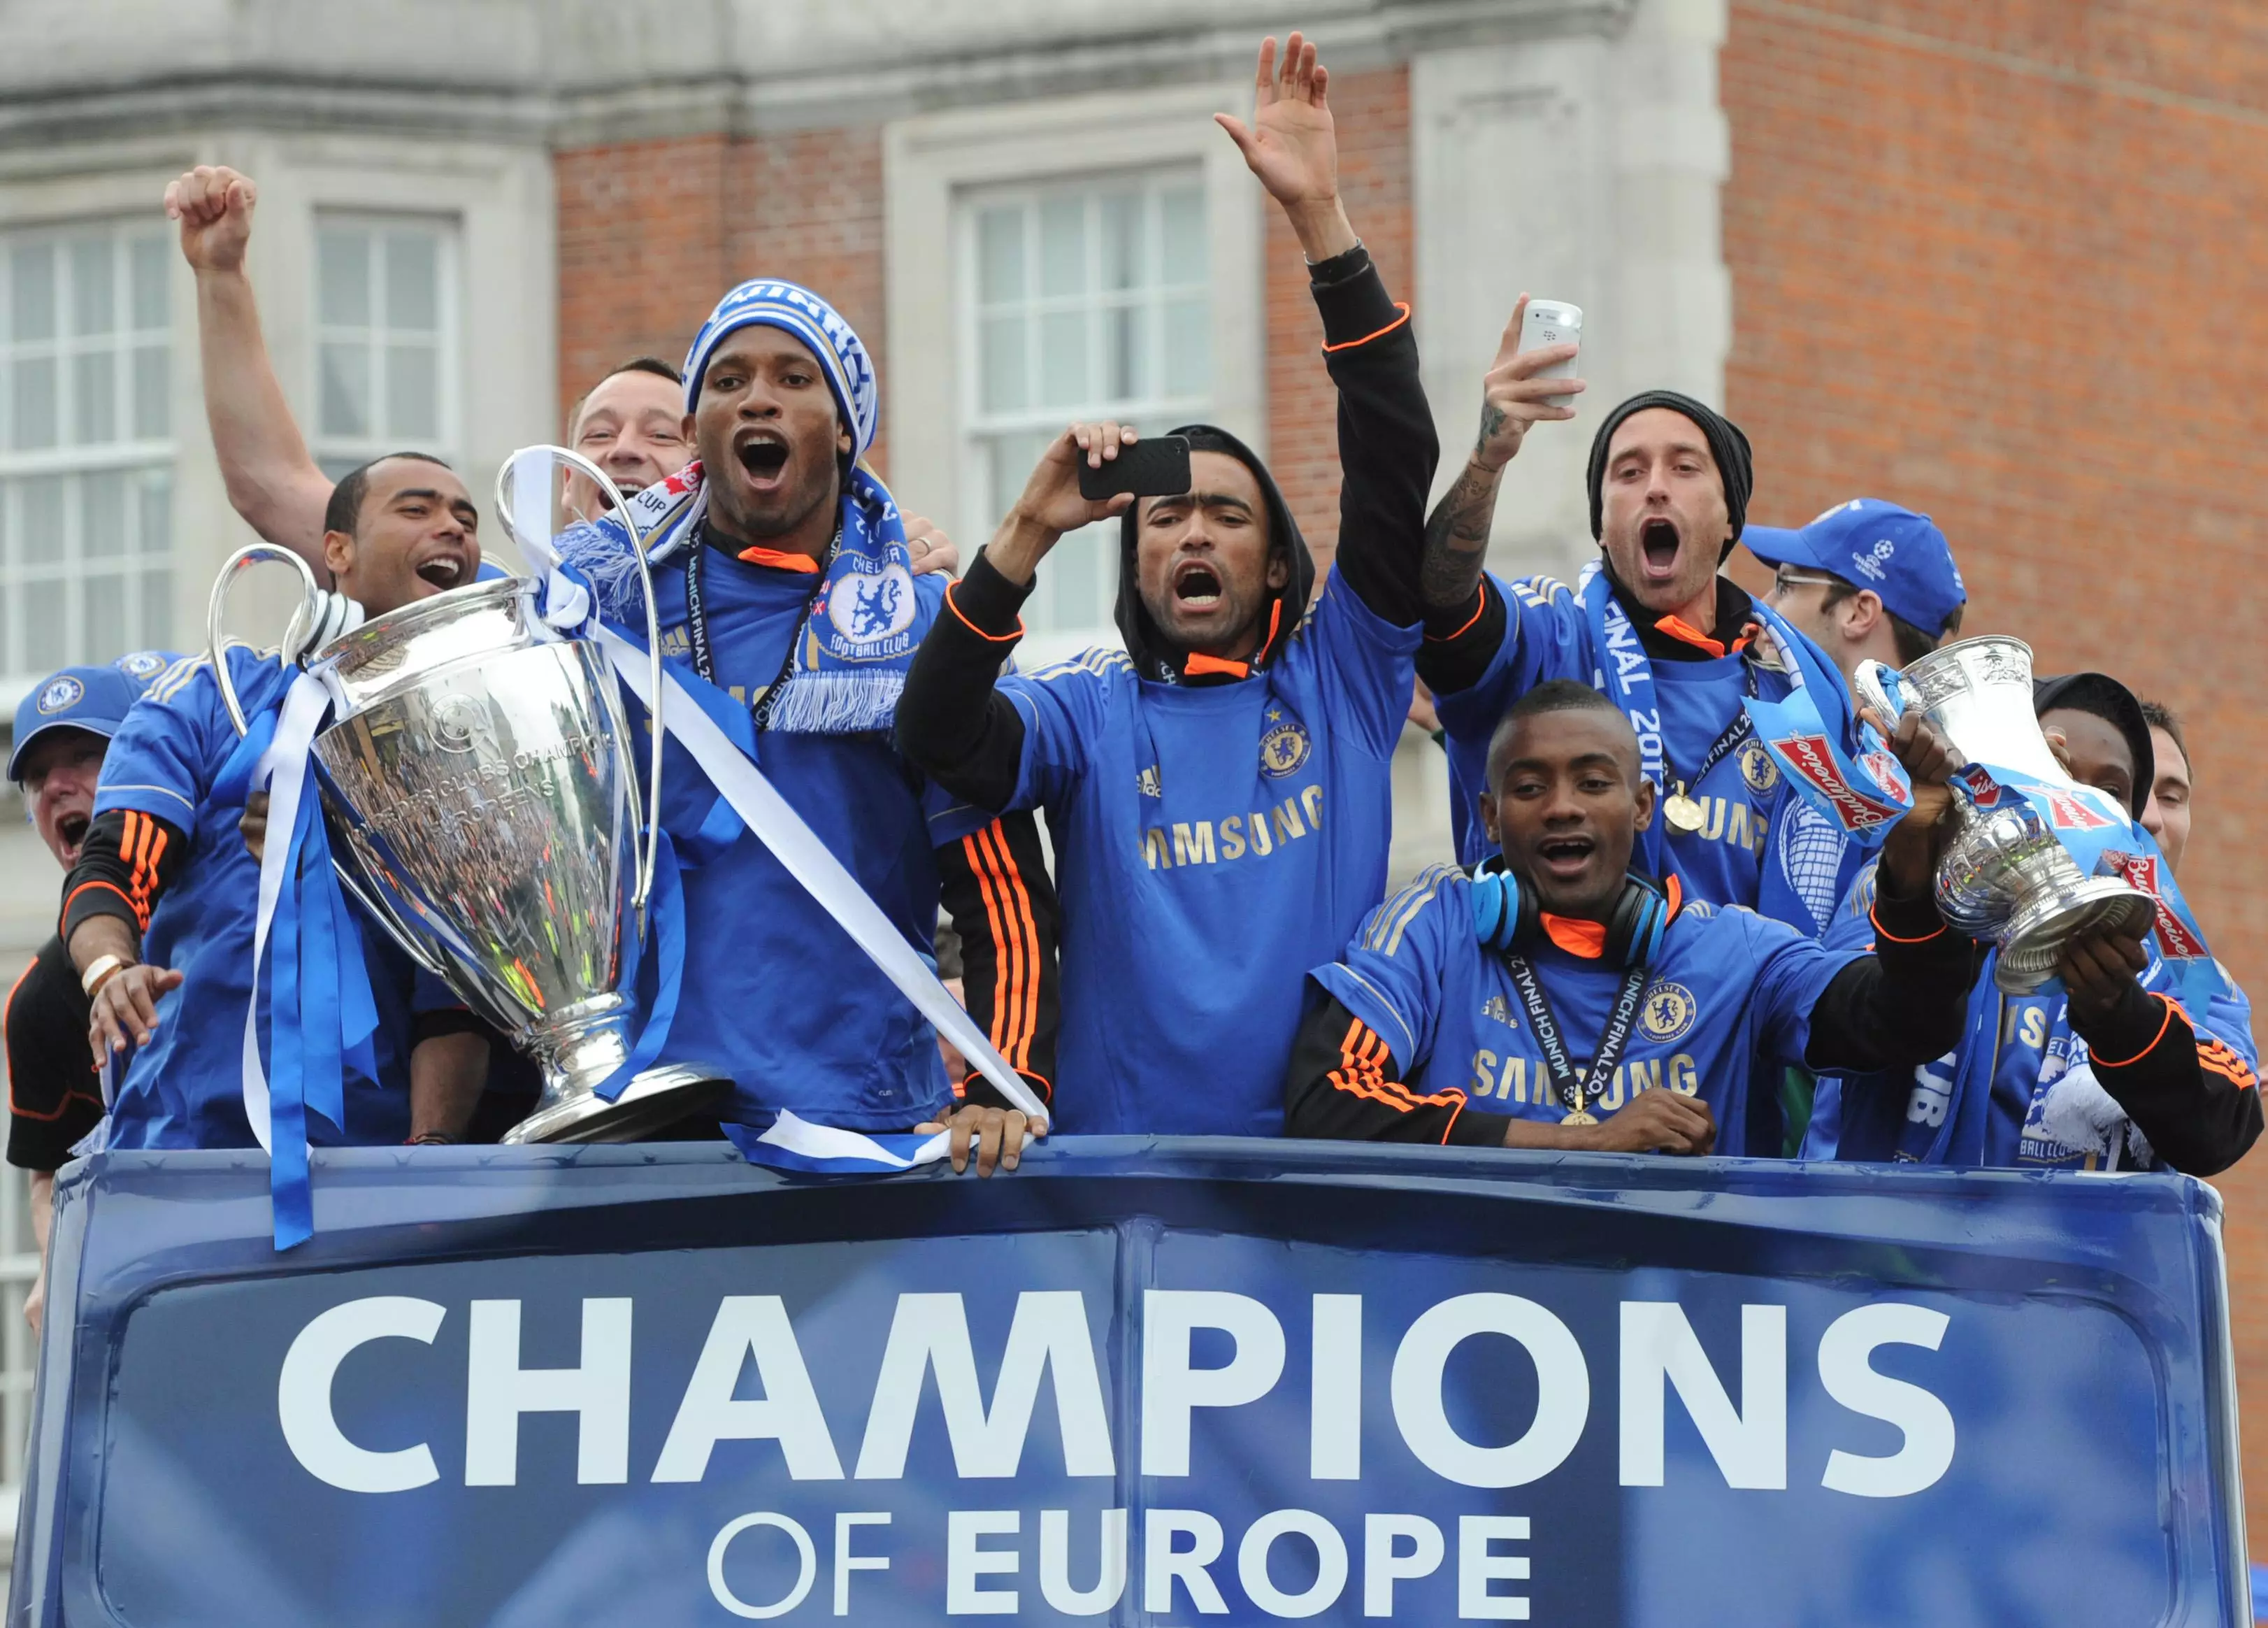 Could Chelsea repeat their feat of 2012 and stop Spurs getting into the Champions League again? Image: PA Images